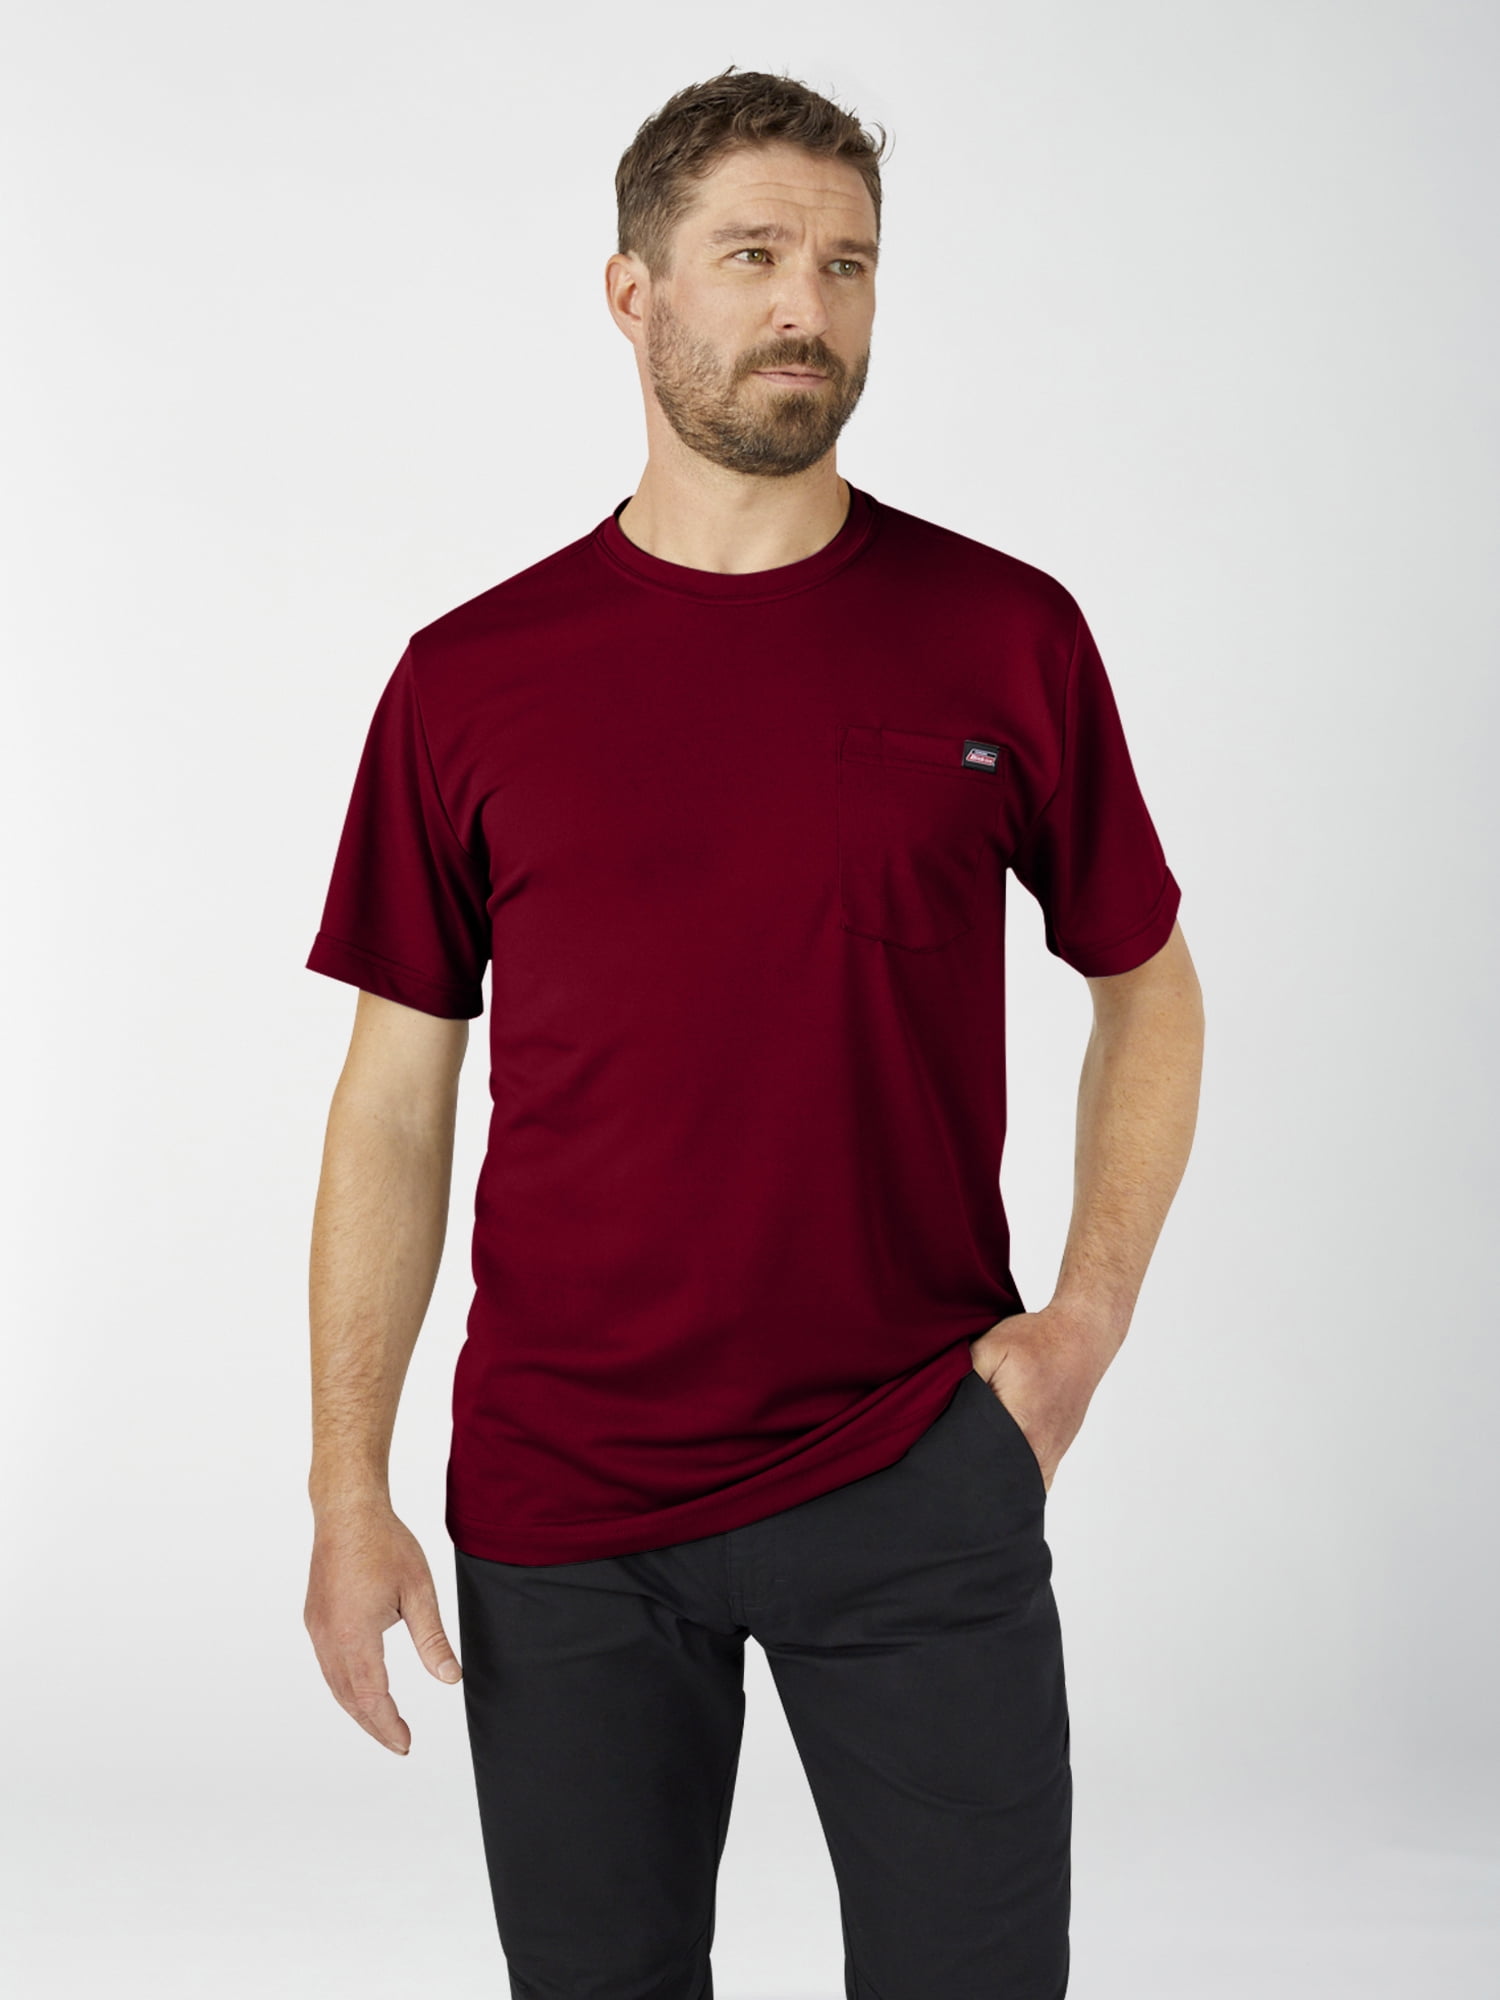 Men\'s Genuine Shirt Polyester Performance Dickies Tee Relaxed Fit